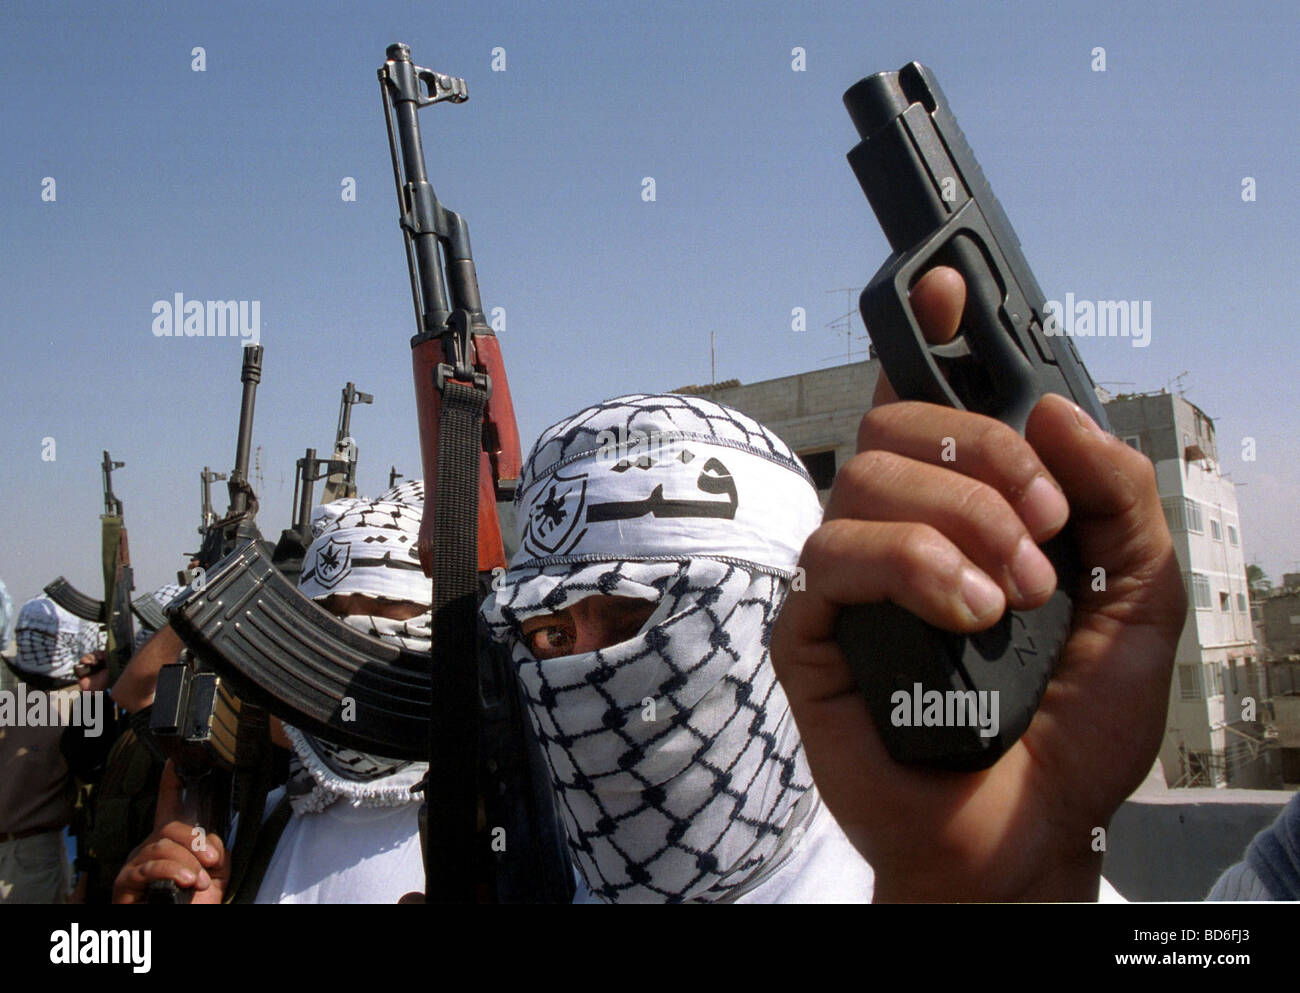 Palestinian Hamas supporters display a show of force at a protest in Gaza Monday October 16 2000 Many Palestinians are angry Stock Photo